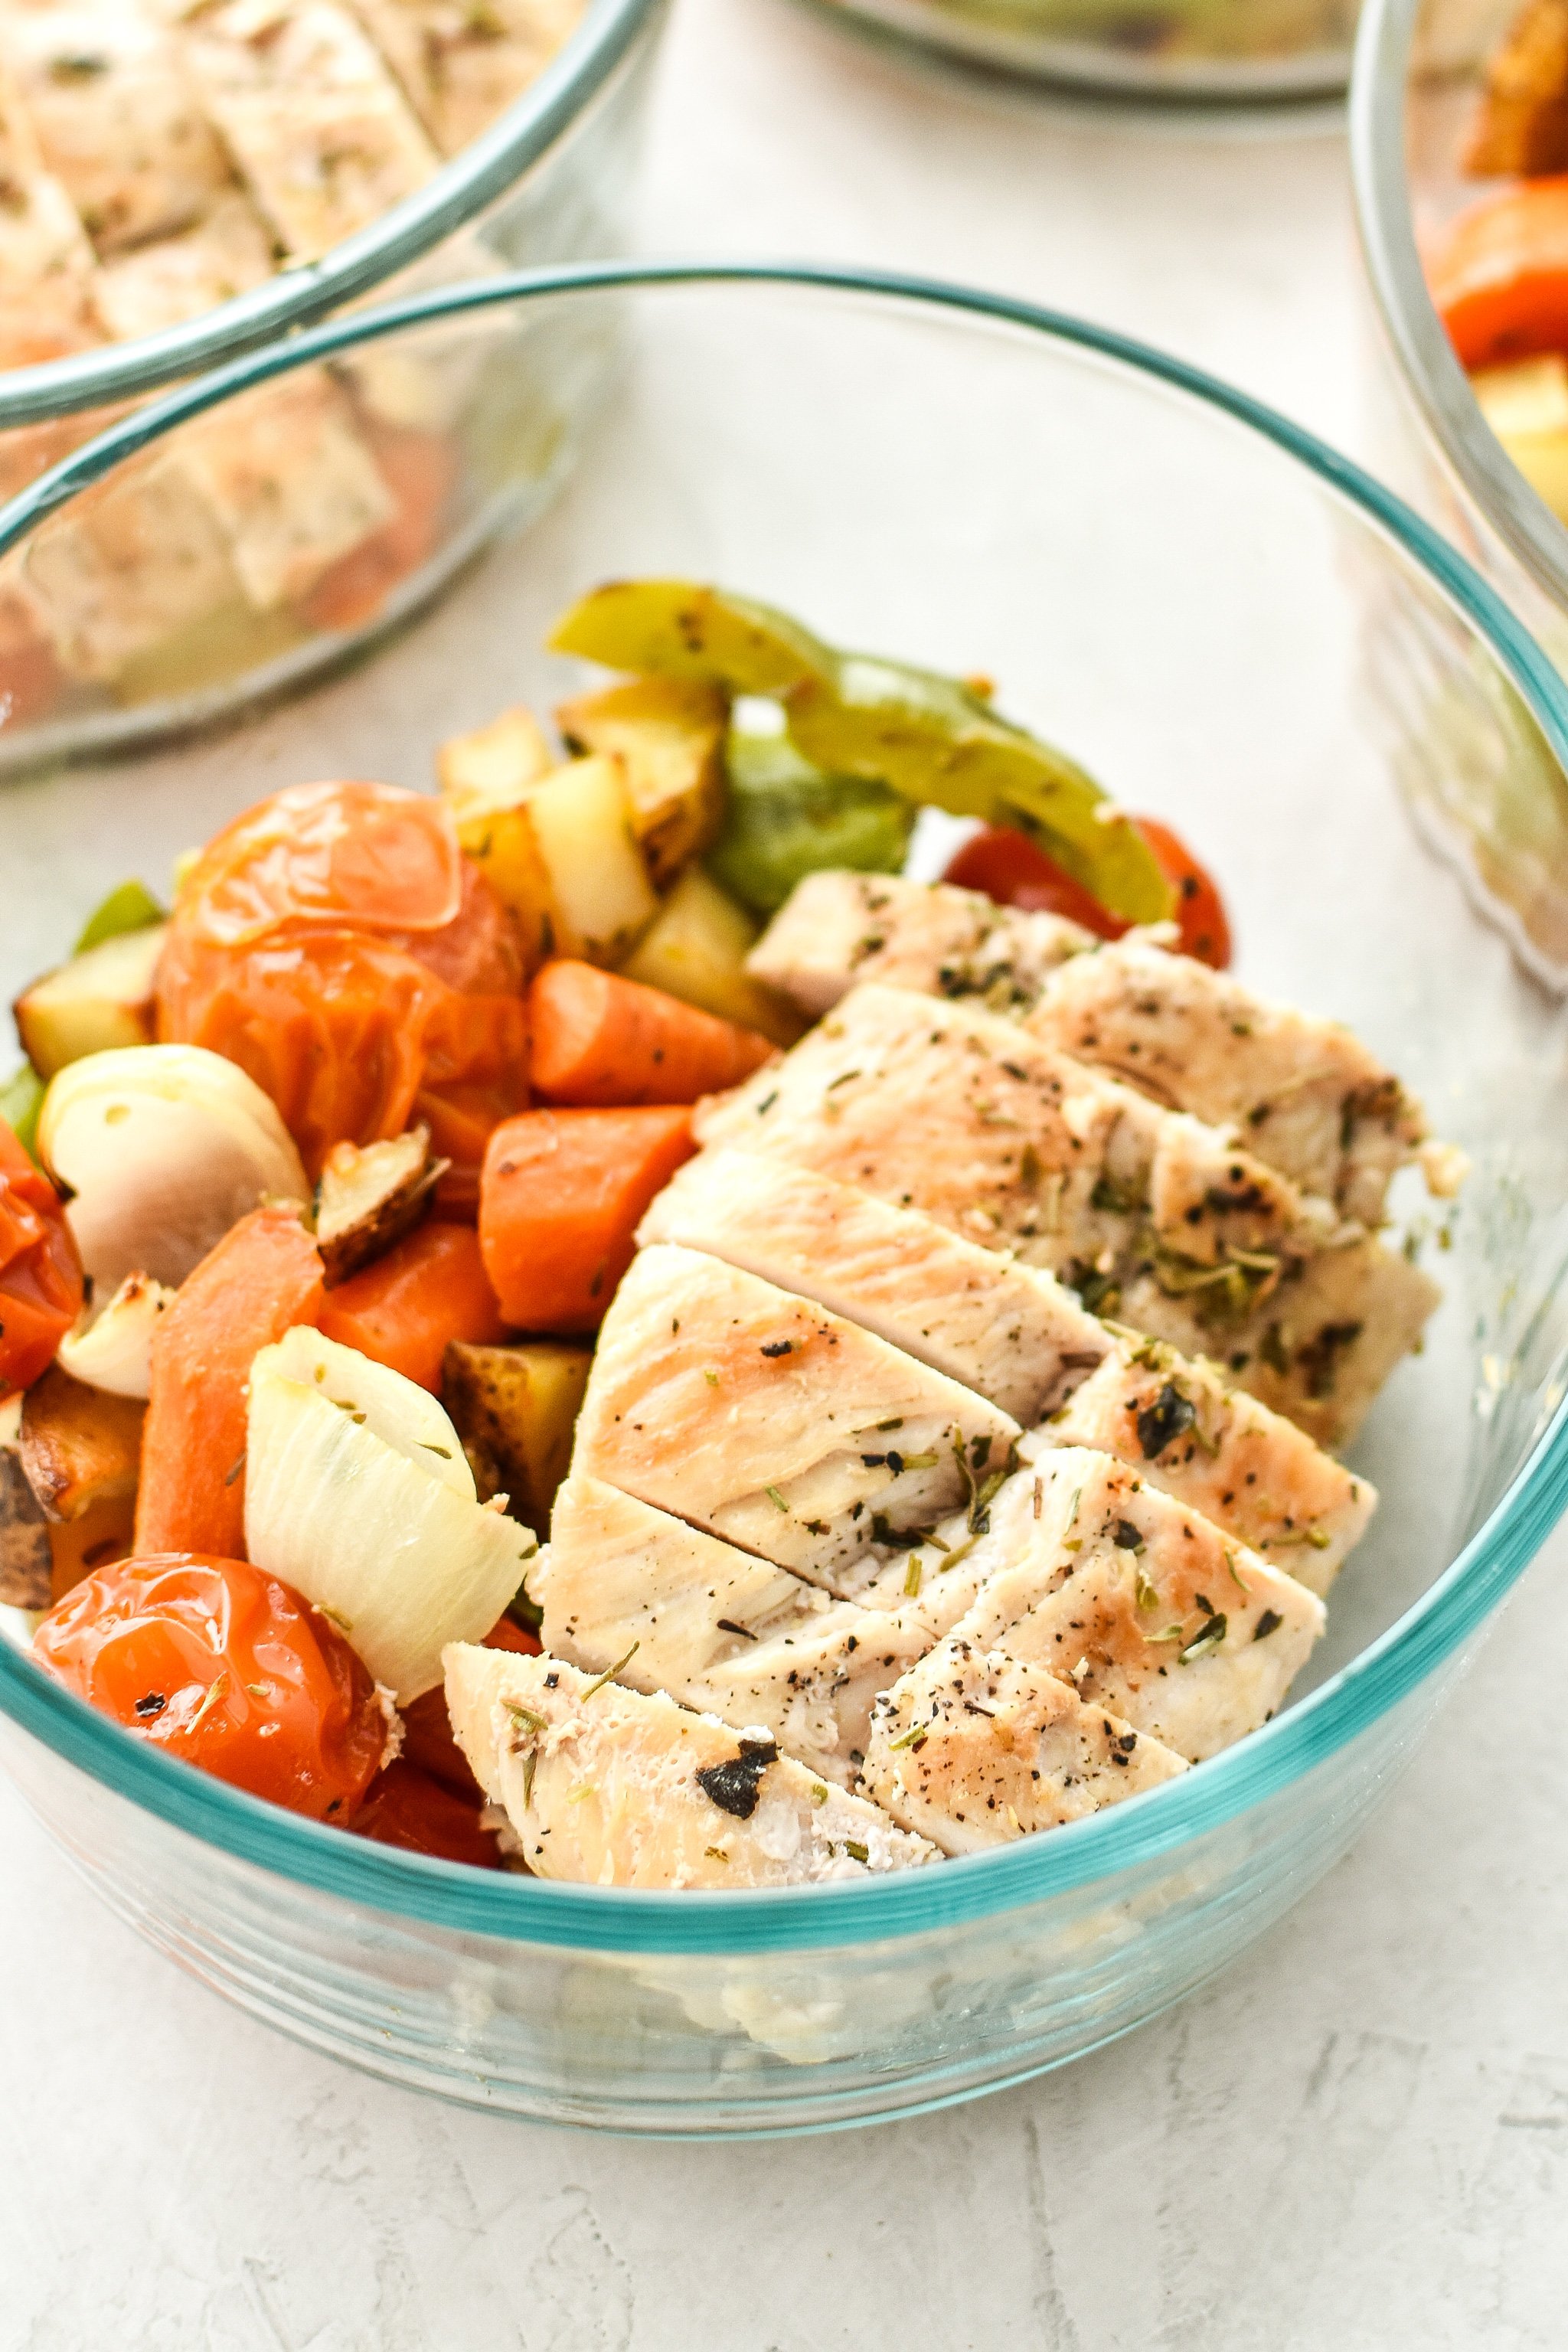 Simple, healthy, Meal Prep Italian Seasoned Chicken with Roasted Imperfect Vegetables including potatoes, cherry tomatoes, onions, and bell peppers!